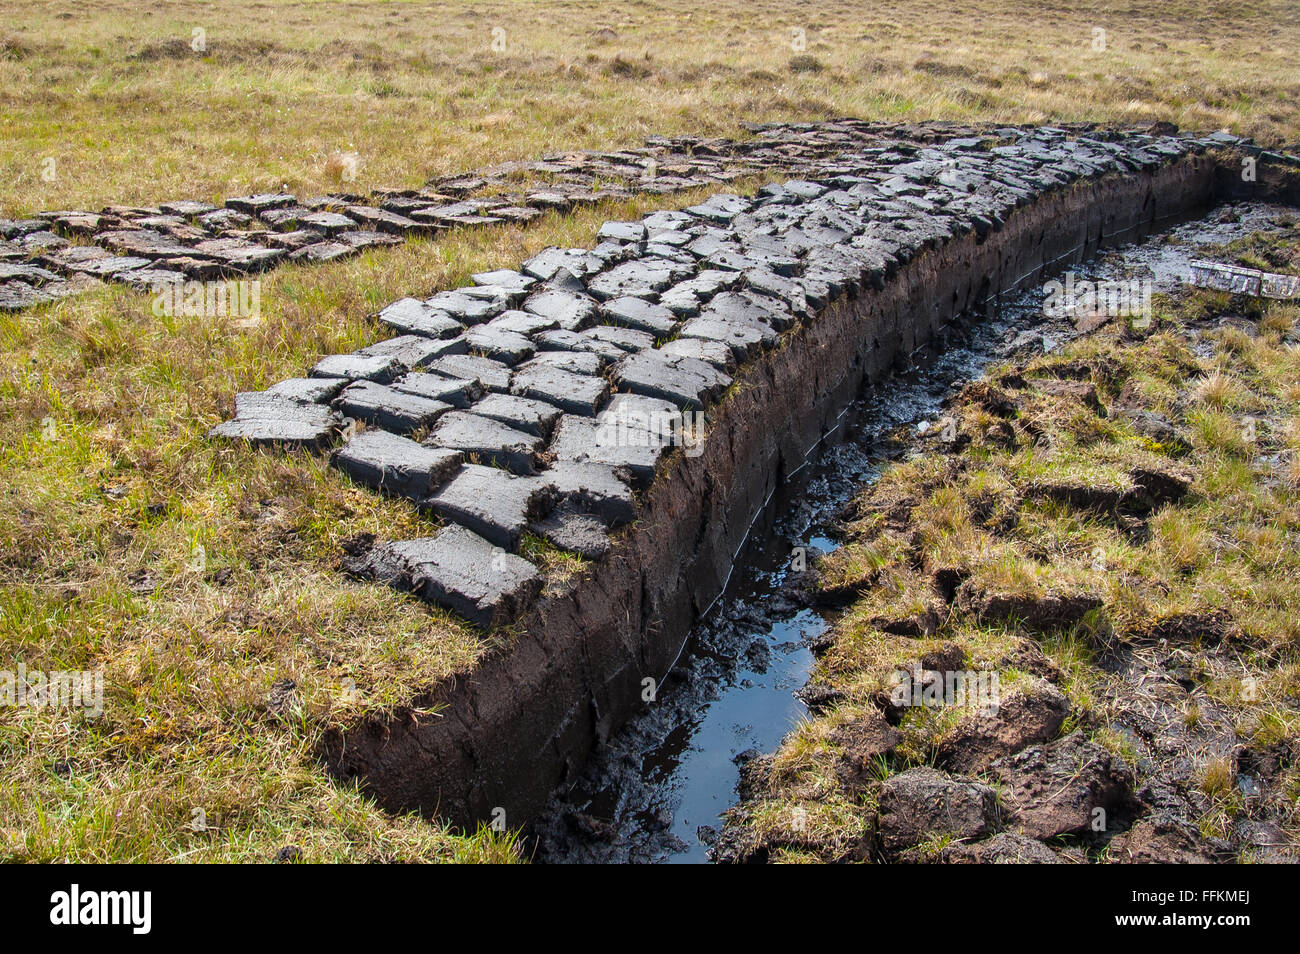 Peat (turf) cut and left to dry on a wetland in the Scottish Highlands Stock Photo